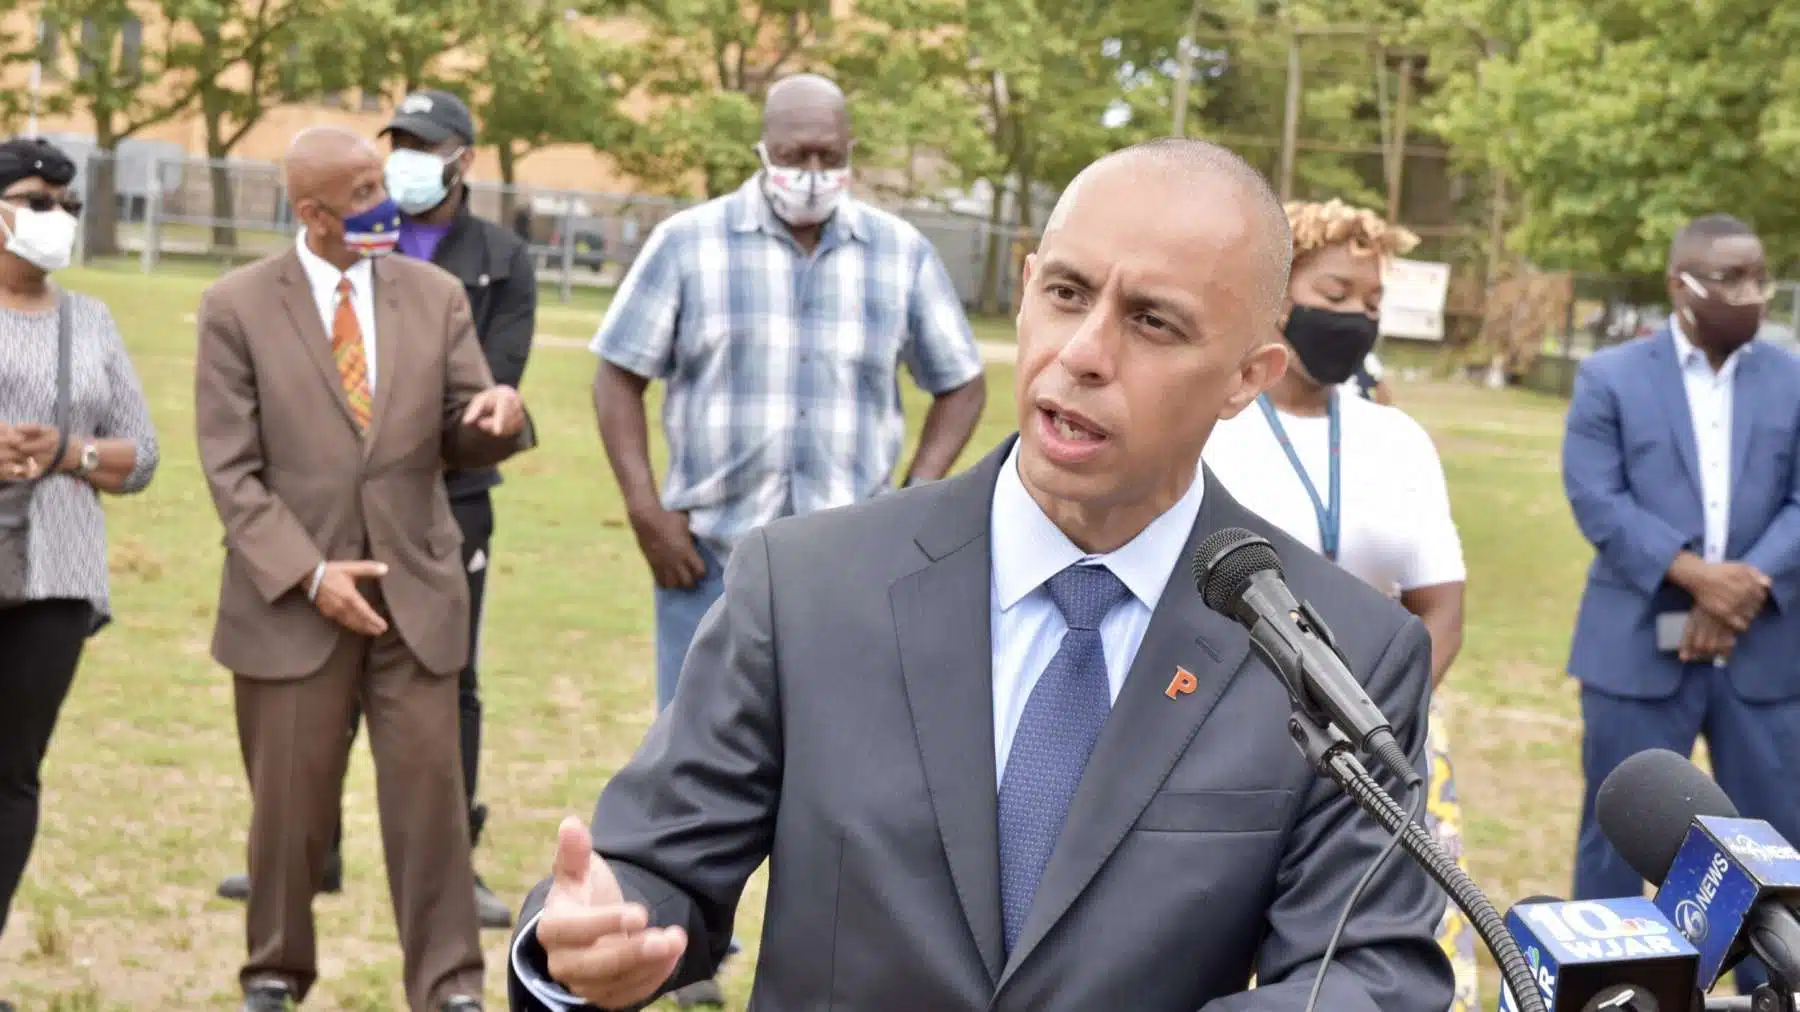 Elorza announces comprehensive review of Public Safety Dept in Providence